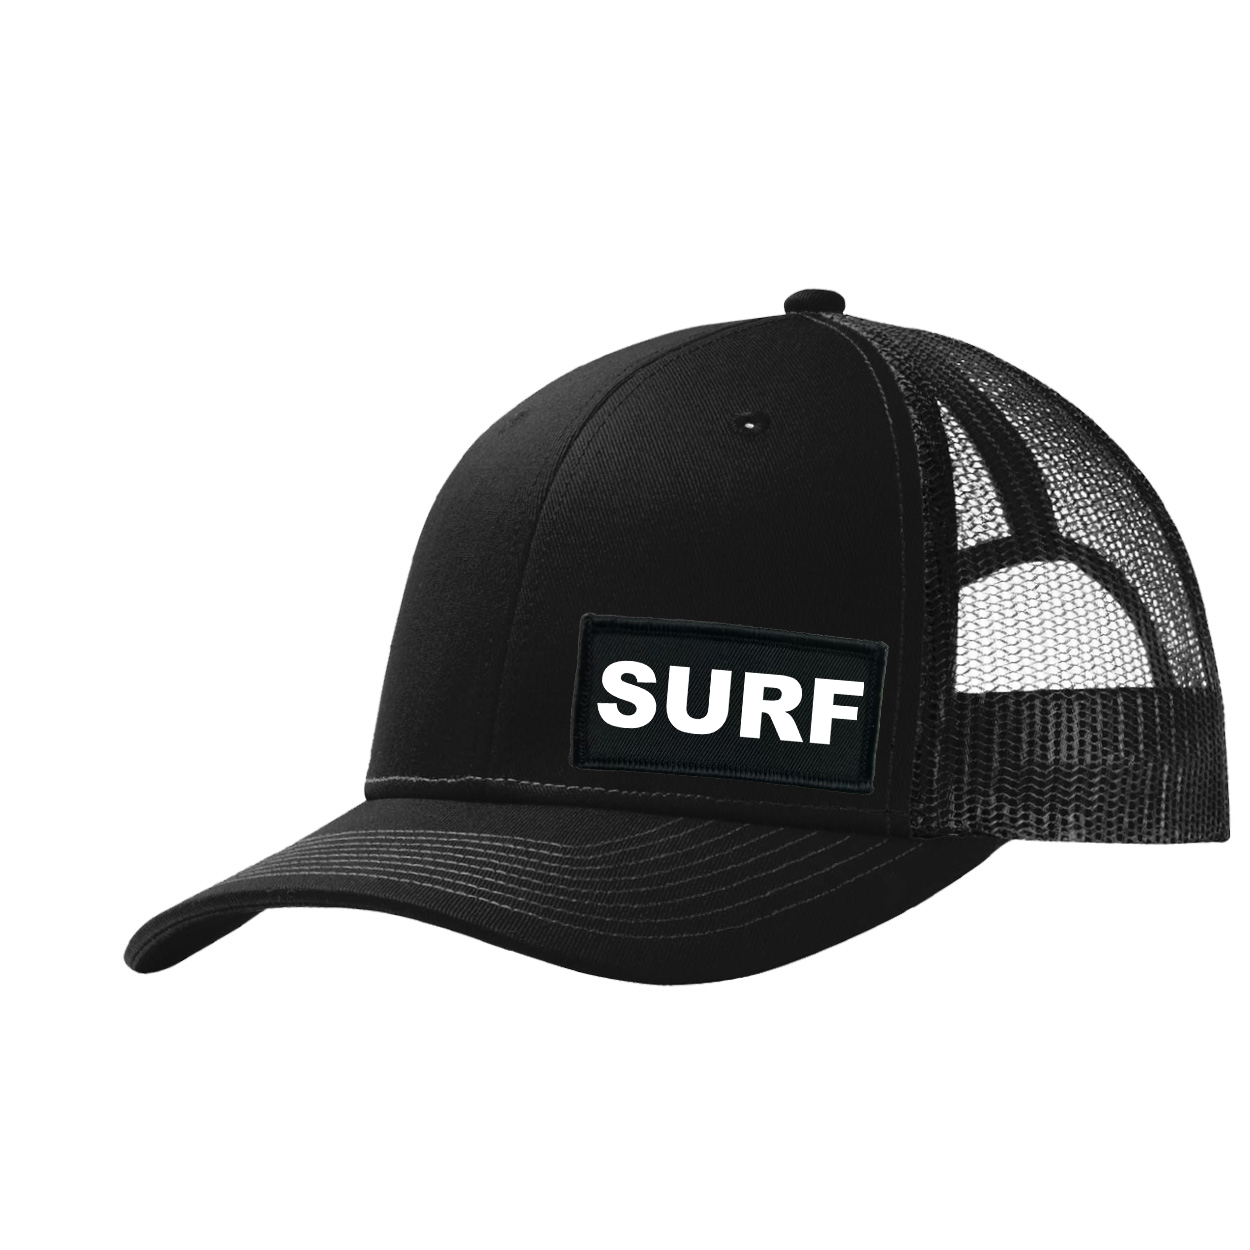 Surf Brand Logo Night Out Woven Patch Snapback Trucker Hat Black